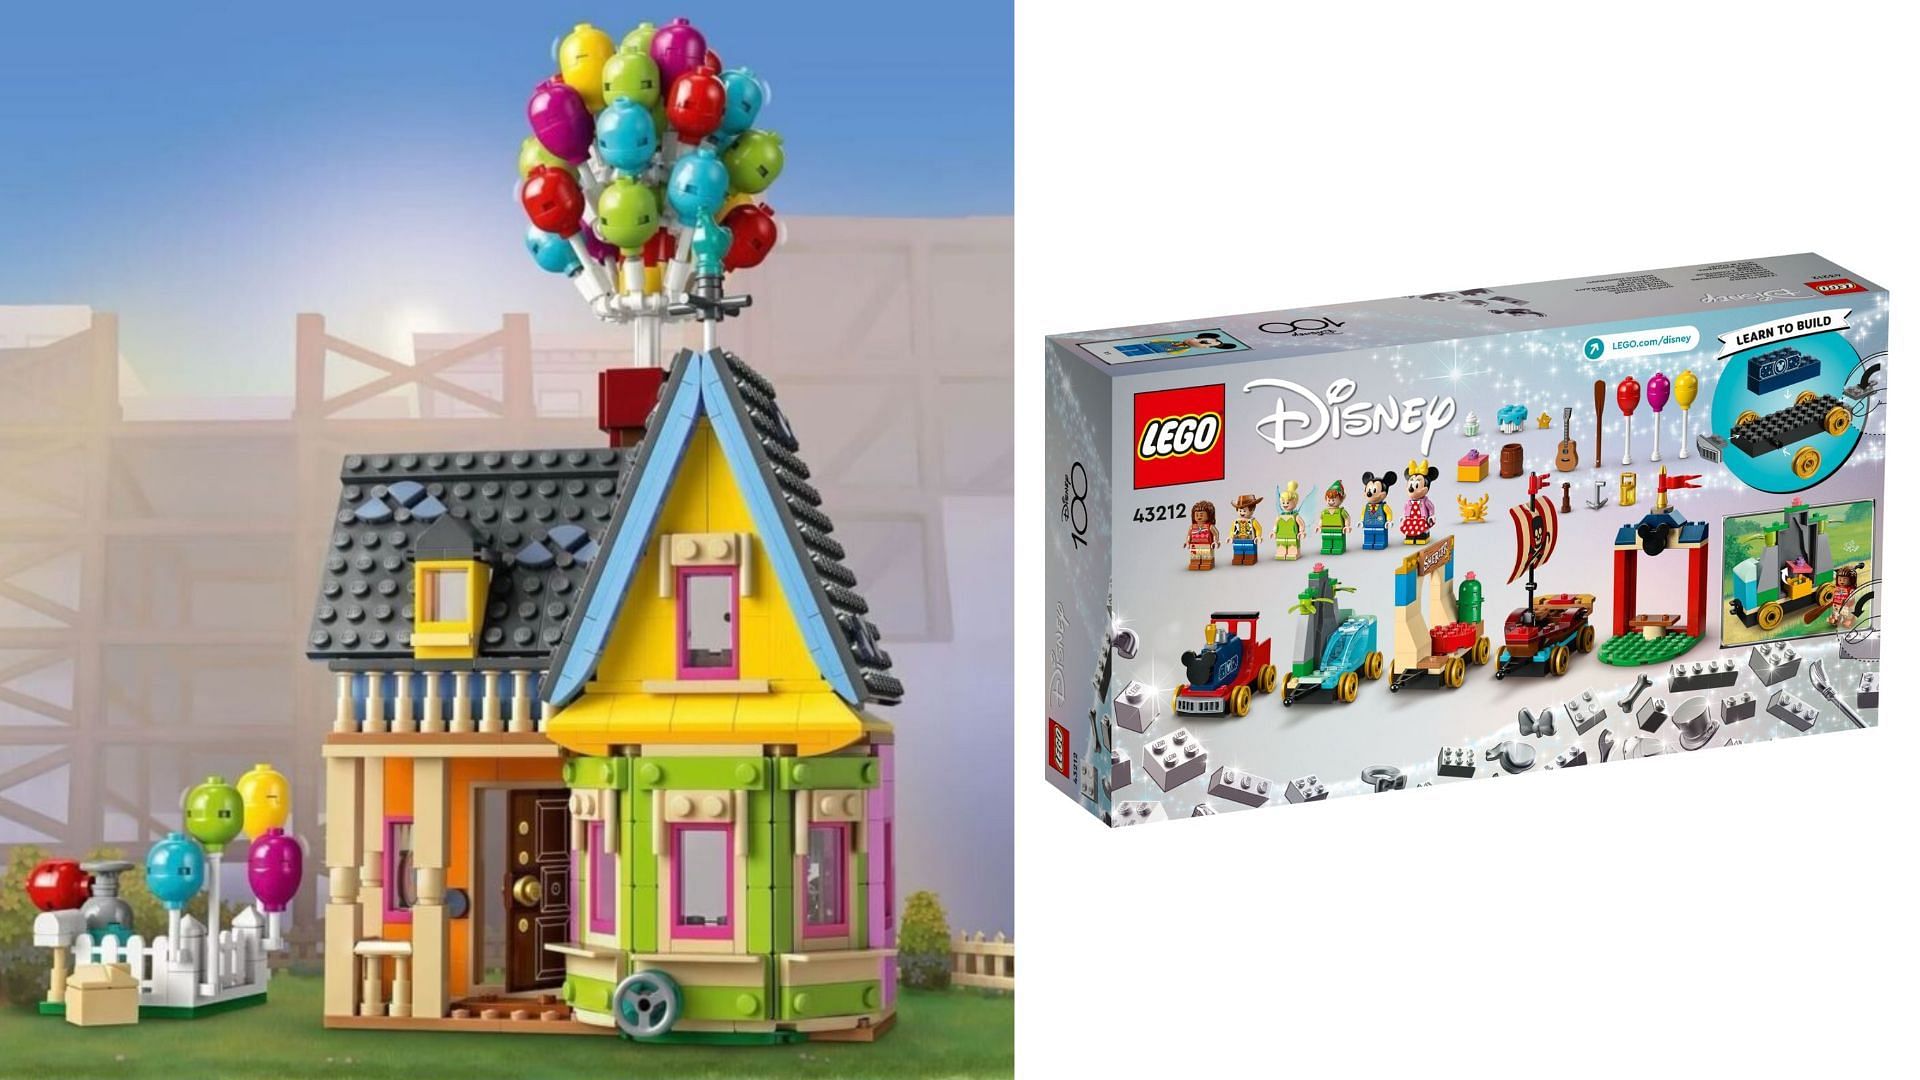 The upcoming Up House and Disney Birthday/Celebration Train set are expected to launch on April 1 (Image via Lego/leaks)